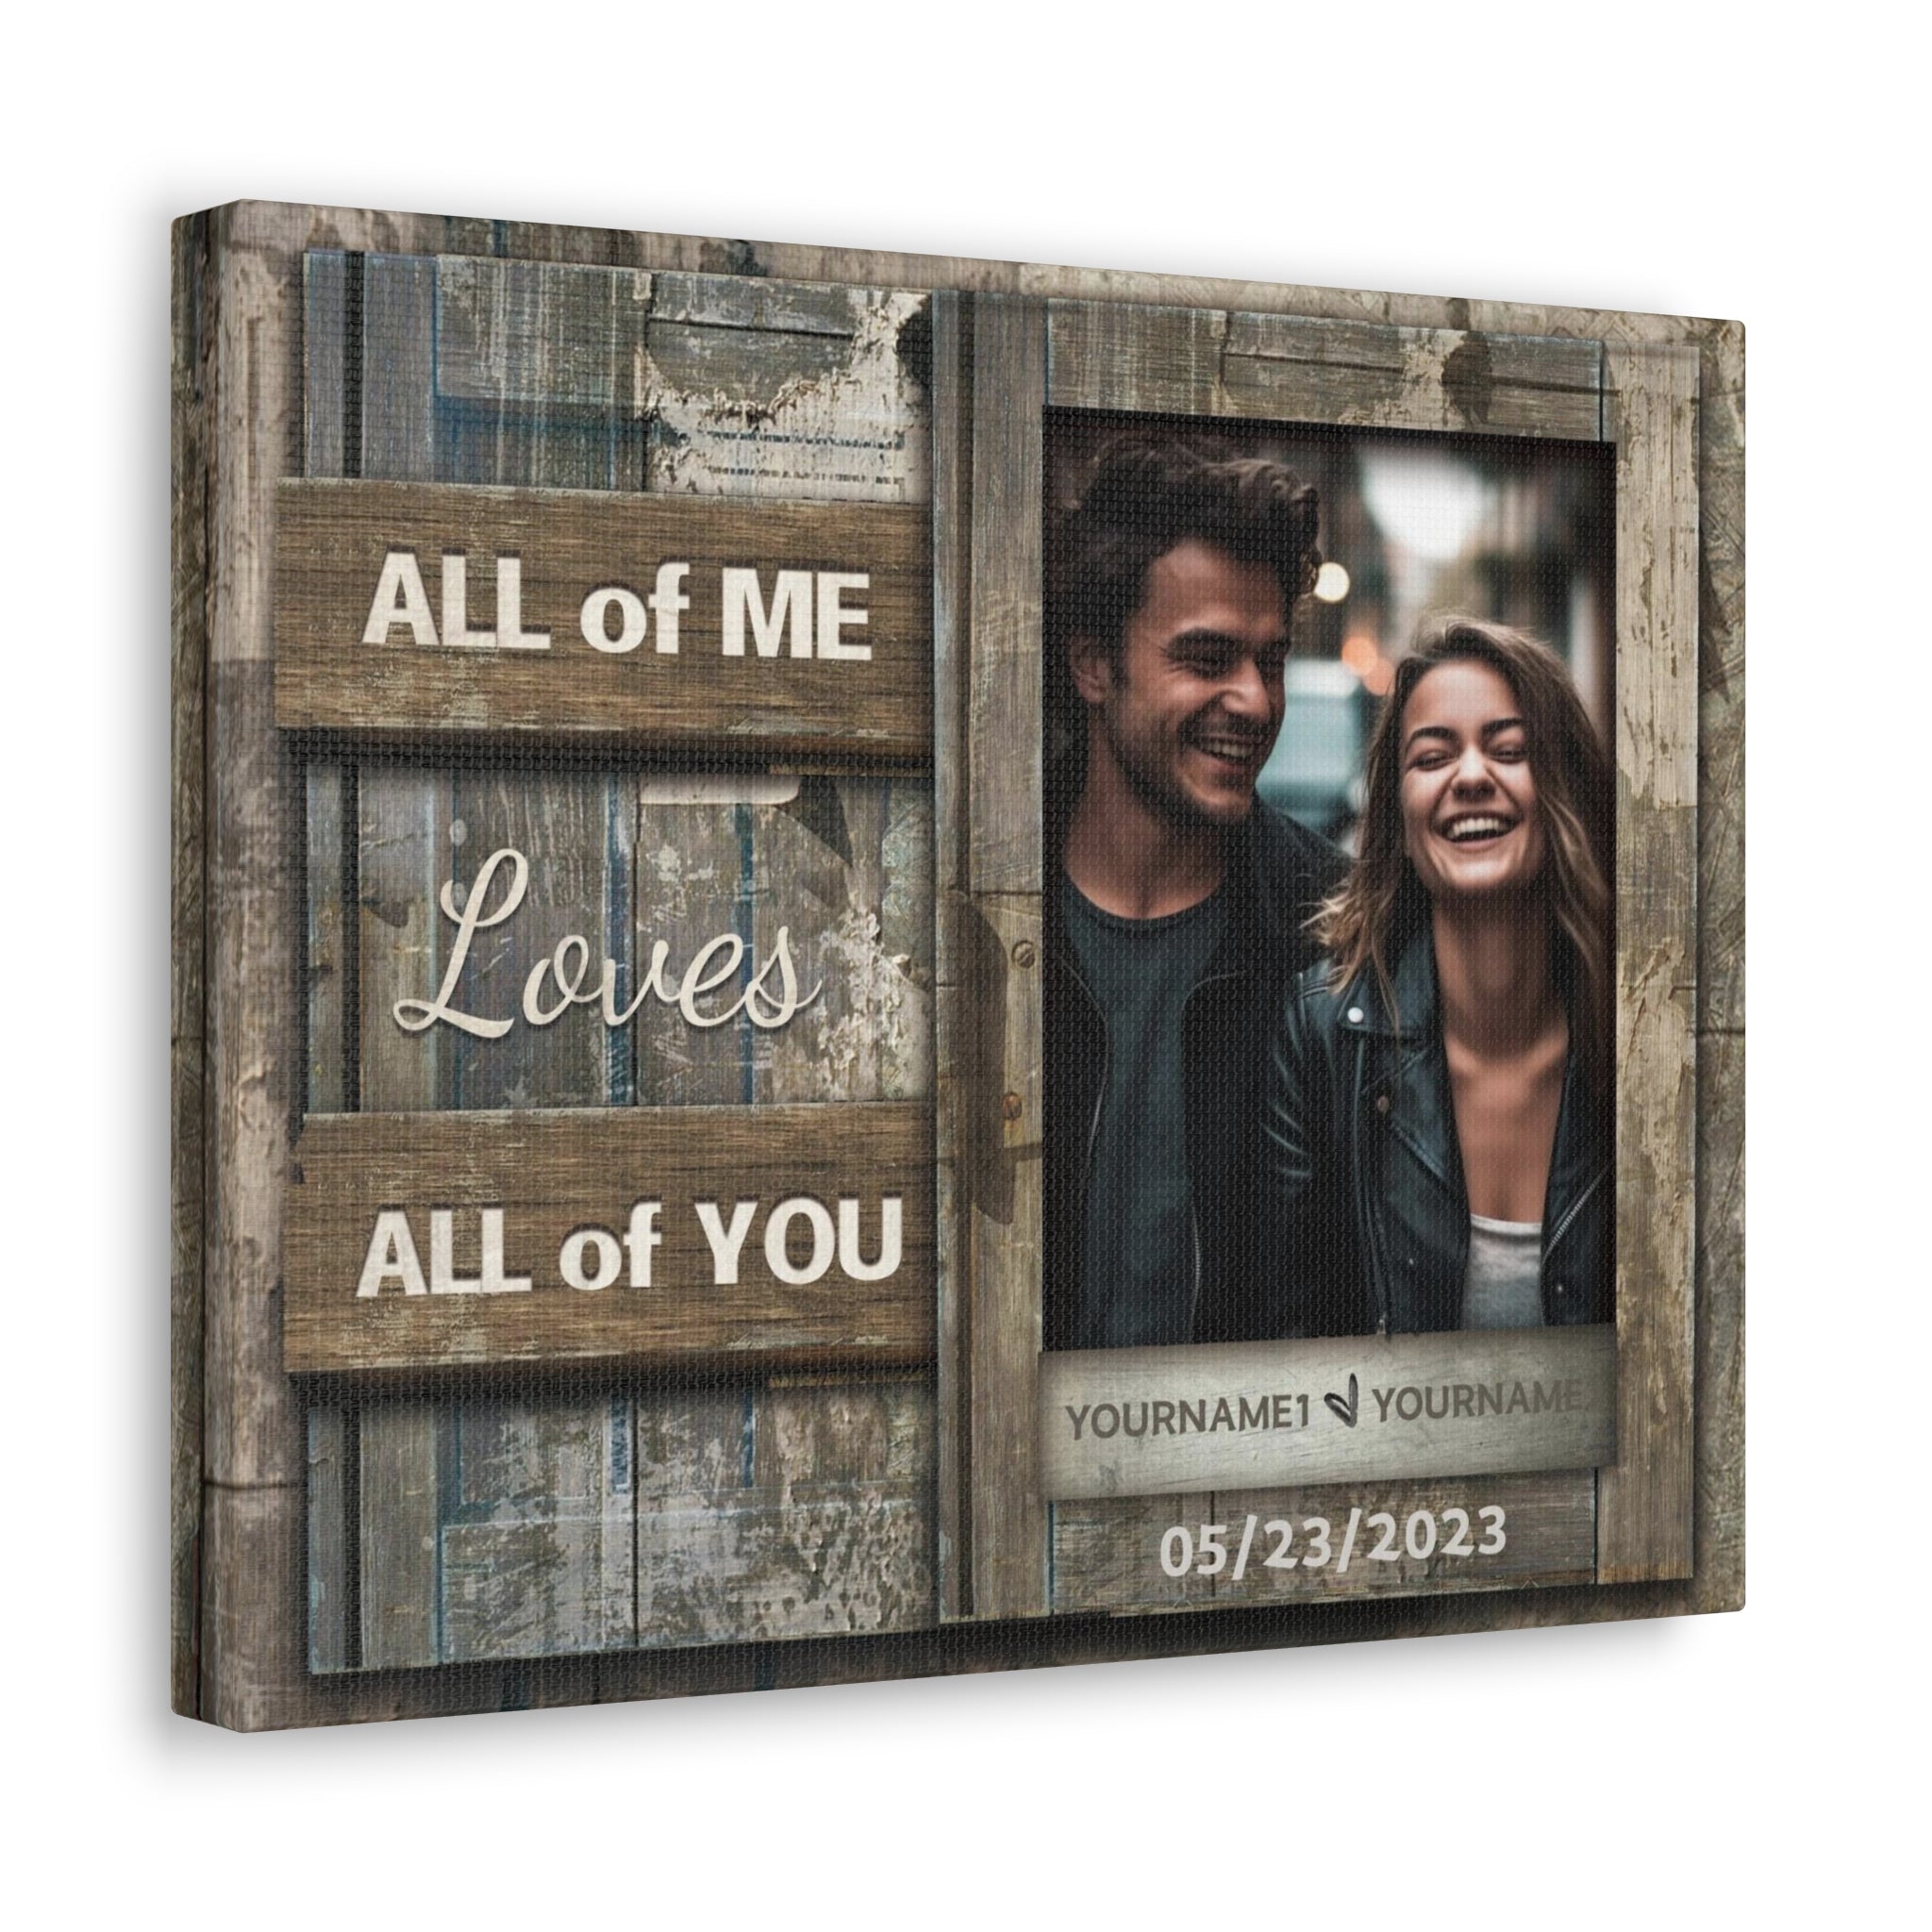 All Of Me Loves All Of You, Wood - Personalized Photo Canvas Print Anniversary Gifts